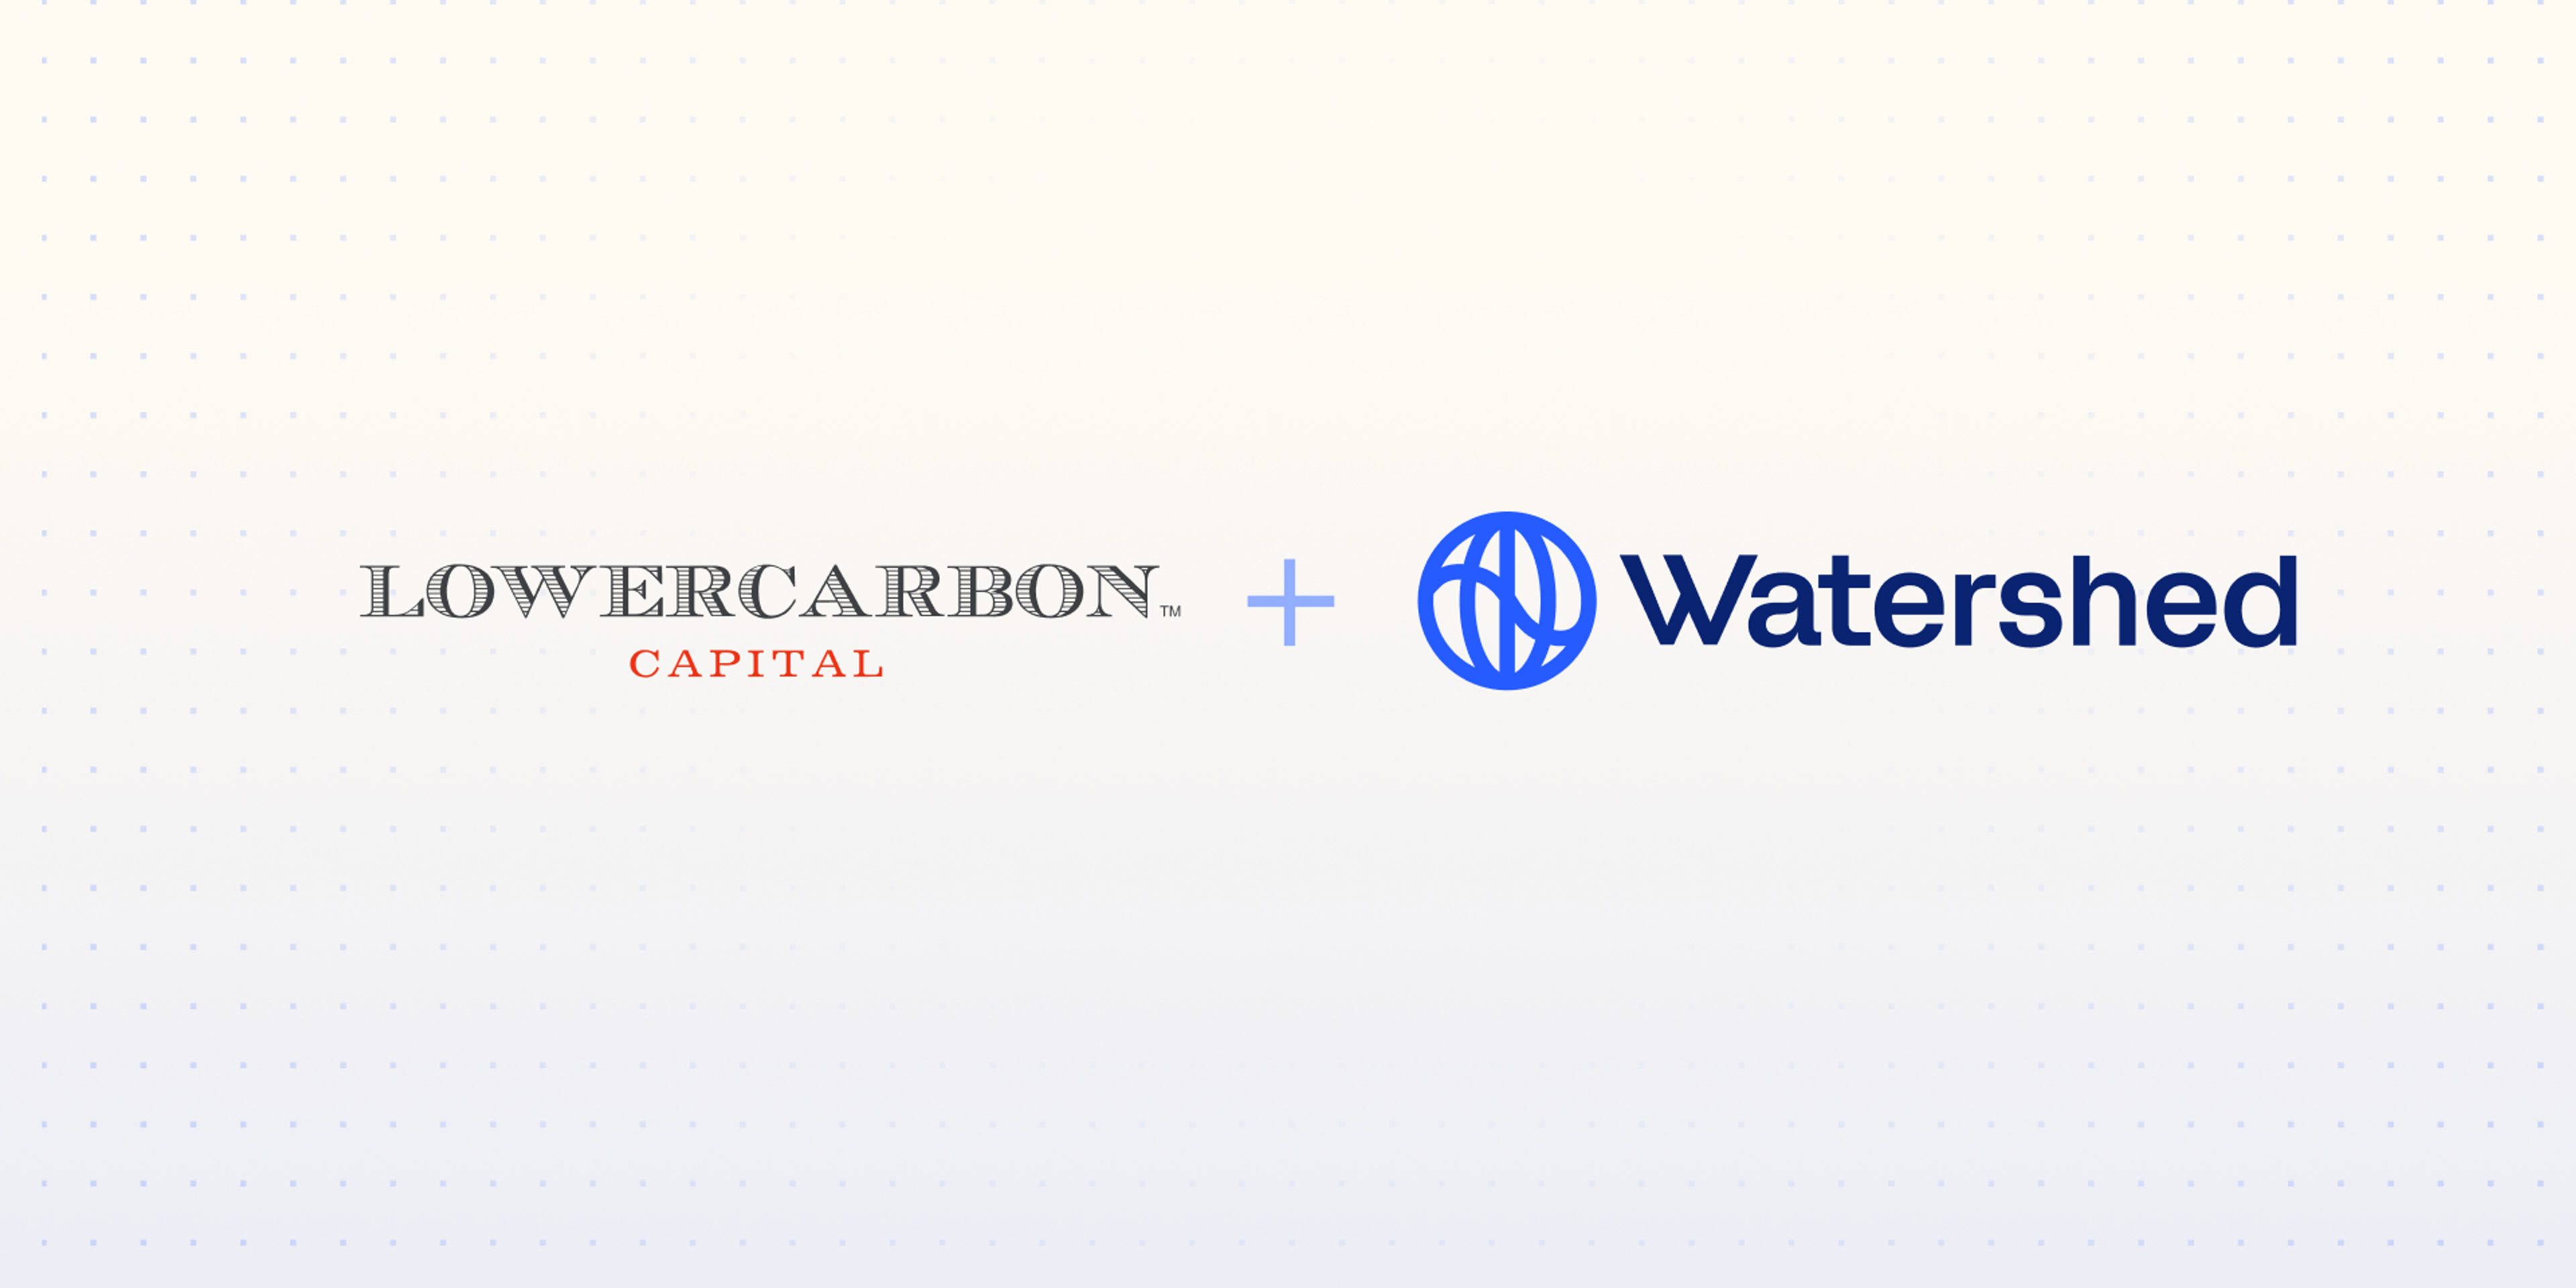 Lowercarbon Capital and Watershed logos